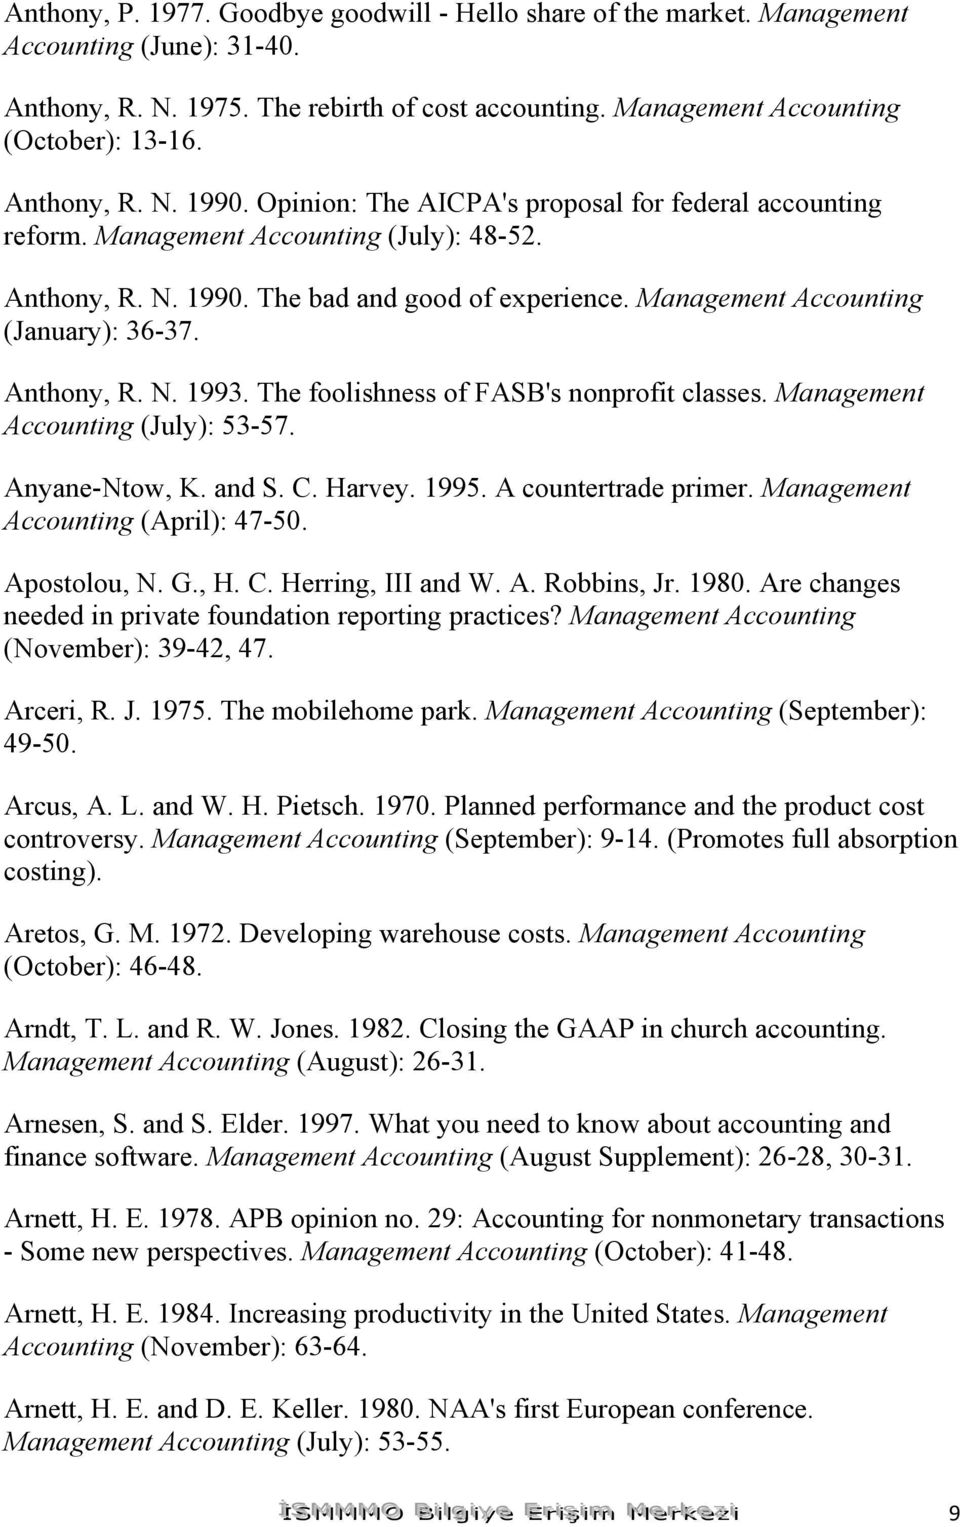 Management Accounting (January): 36-37. Anthony, R. N. 1993. The foolishness of FASB's nonprofit classes. Management Accounting (July): 53-57. Anyane-Ntow, K. and S. C. Harvey. 1995.